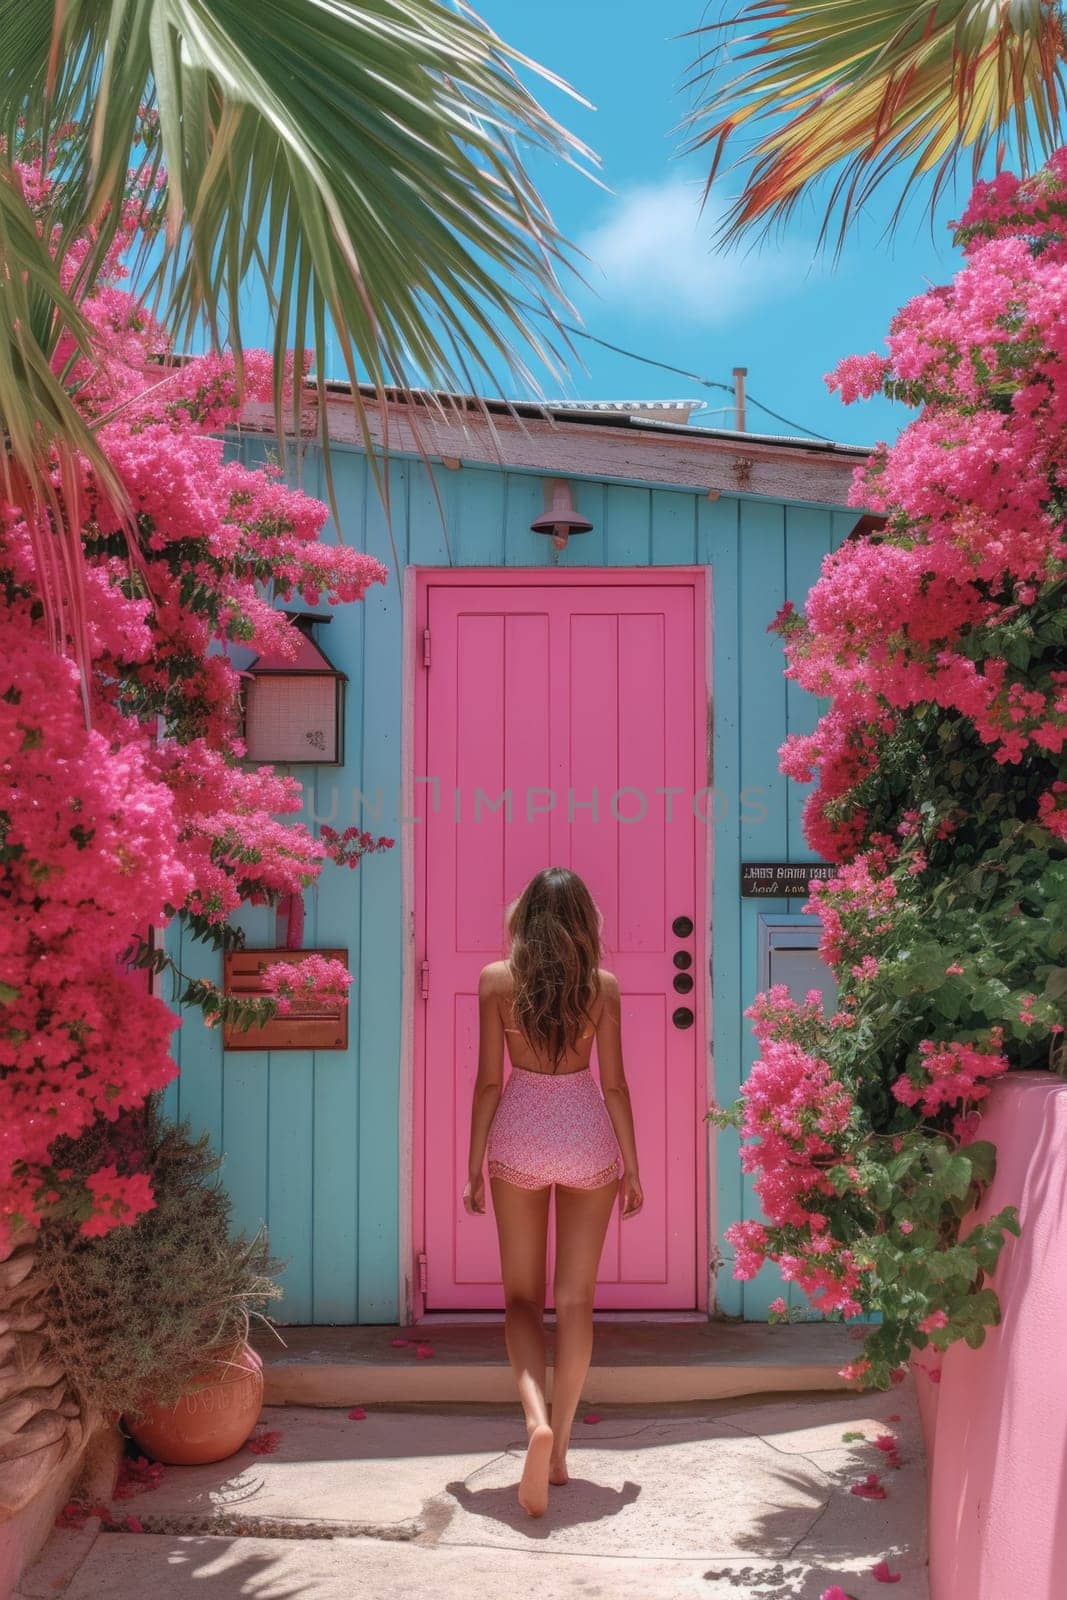 a girl in a pink dress near the entrance to a house with tropical vegetation by Lobachad